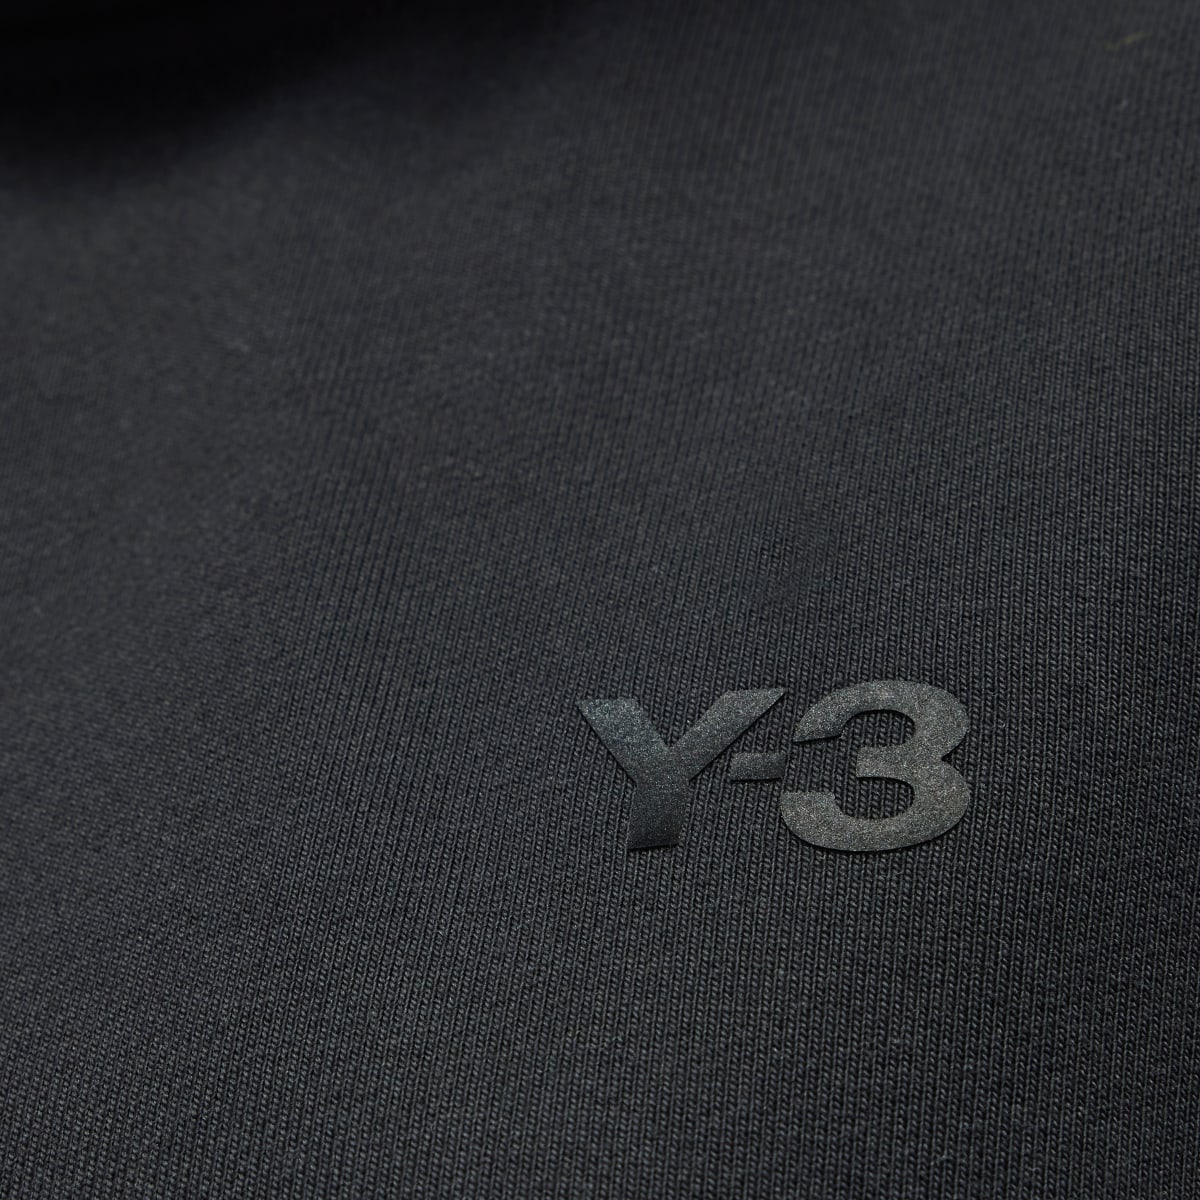 Adidas Y-3 French Terry Boxy Hoodie. 6